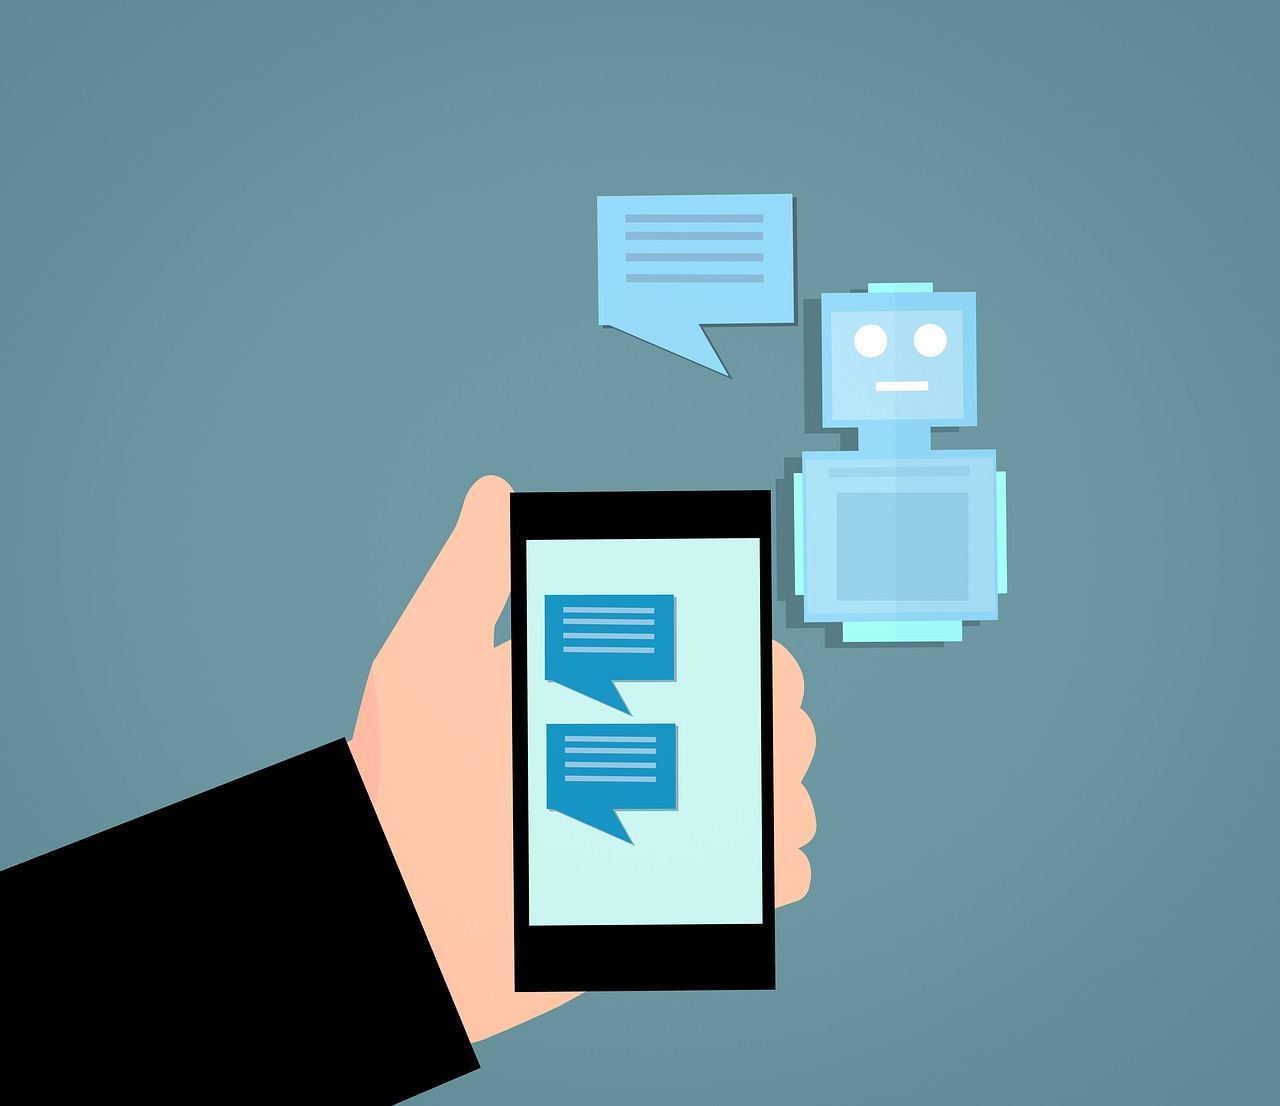 Chatbot, The Conversational AI: What Are They and How They Are Used